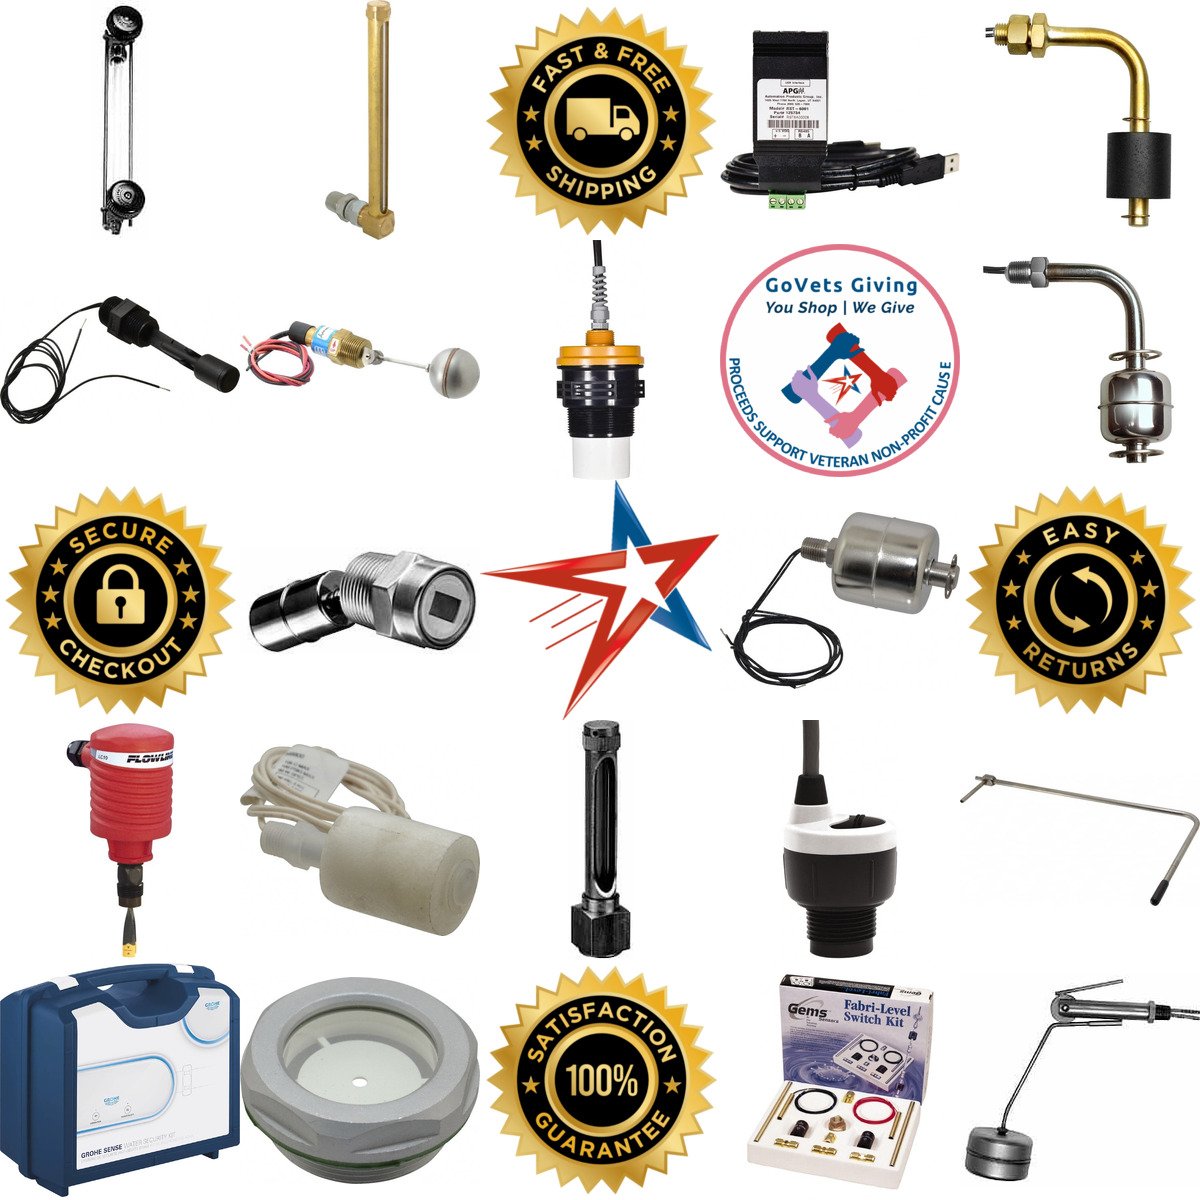 A selection of Liquid Level Measuring Instruments products on GoVets